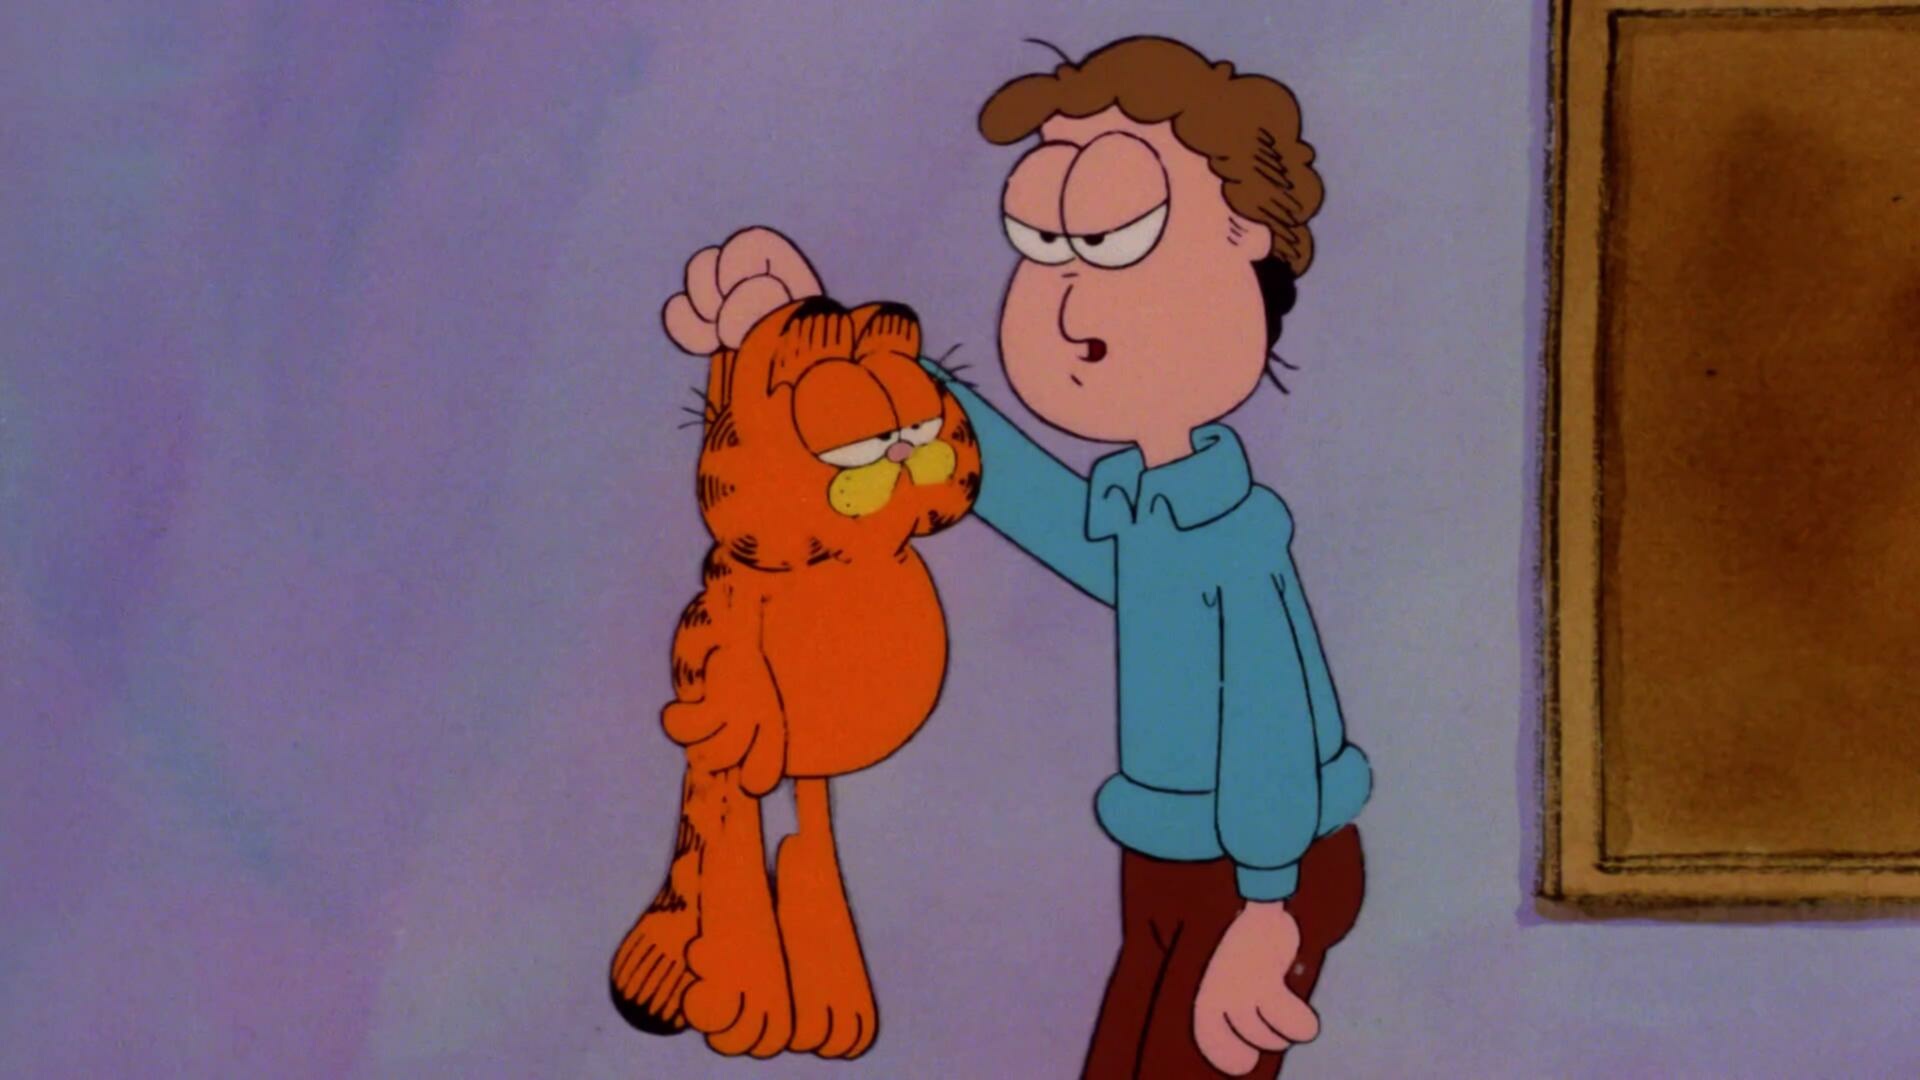 Garfield And Friends S02E13 The Curse of Klopman Mud Sweet Mud Rainy Day Dreams 1080p WEB DL AAC2 0